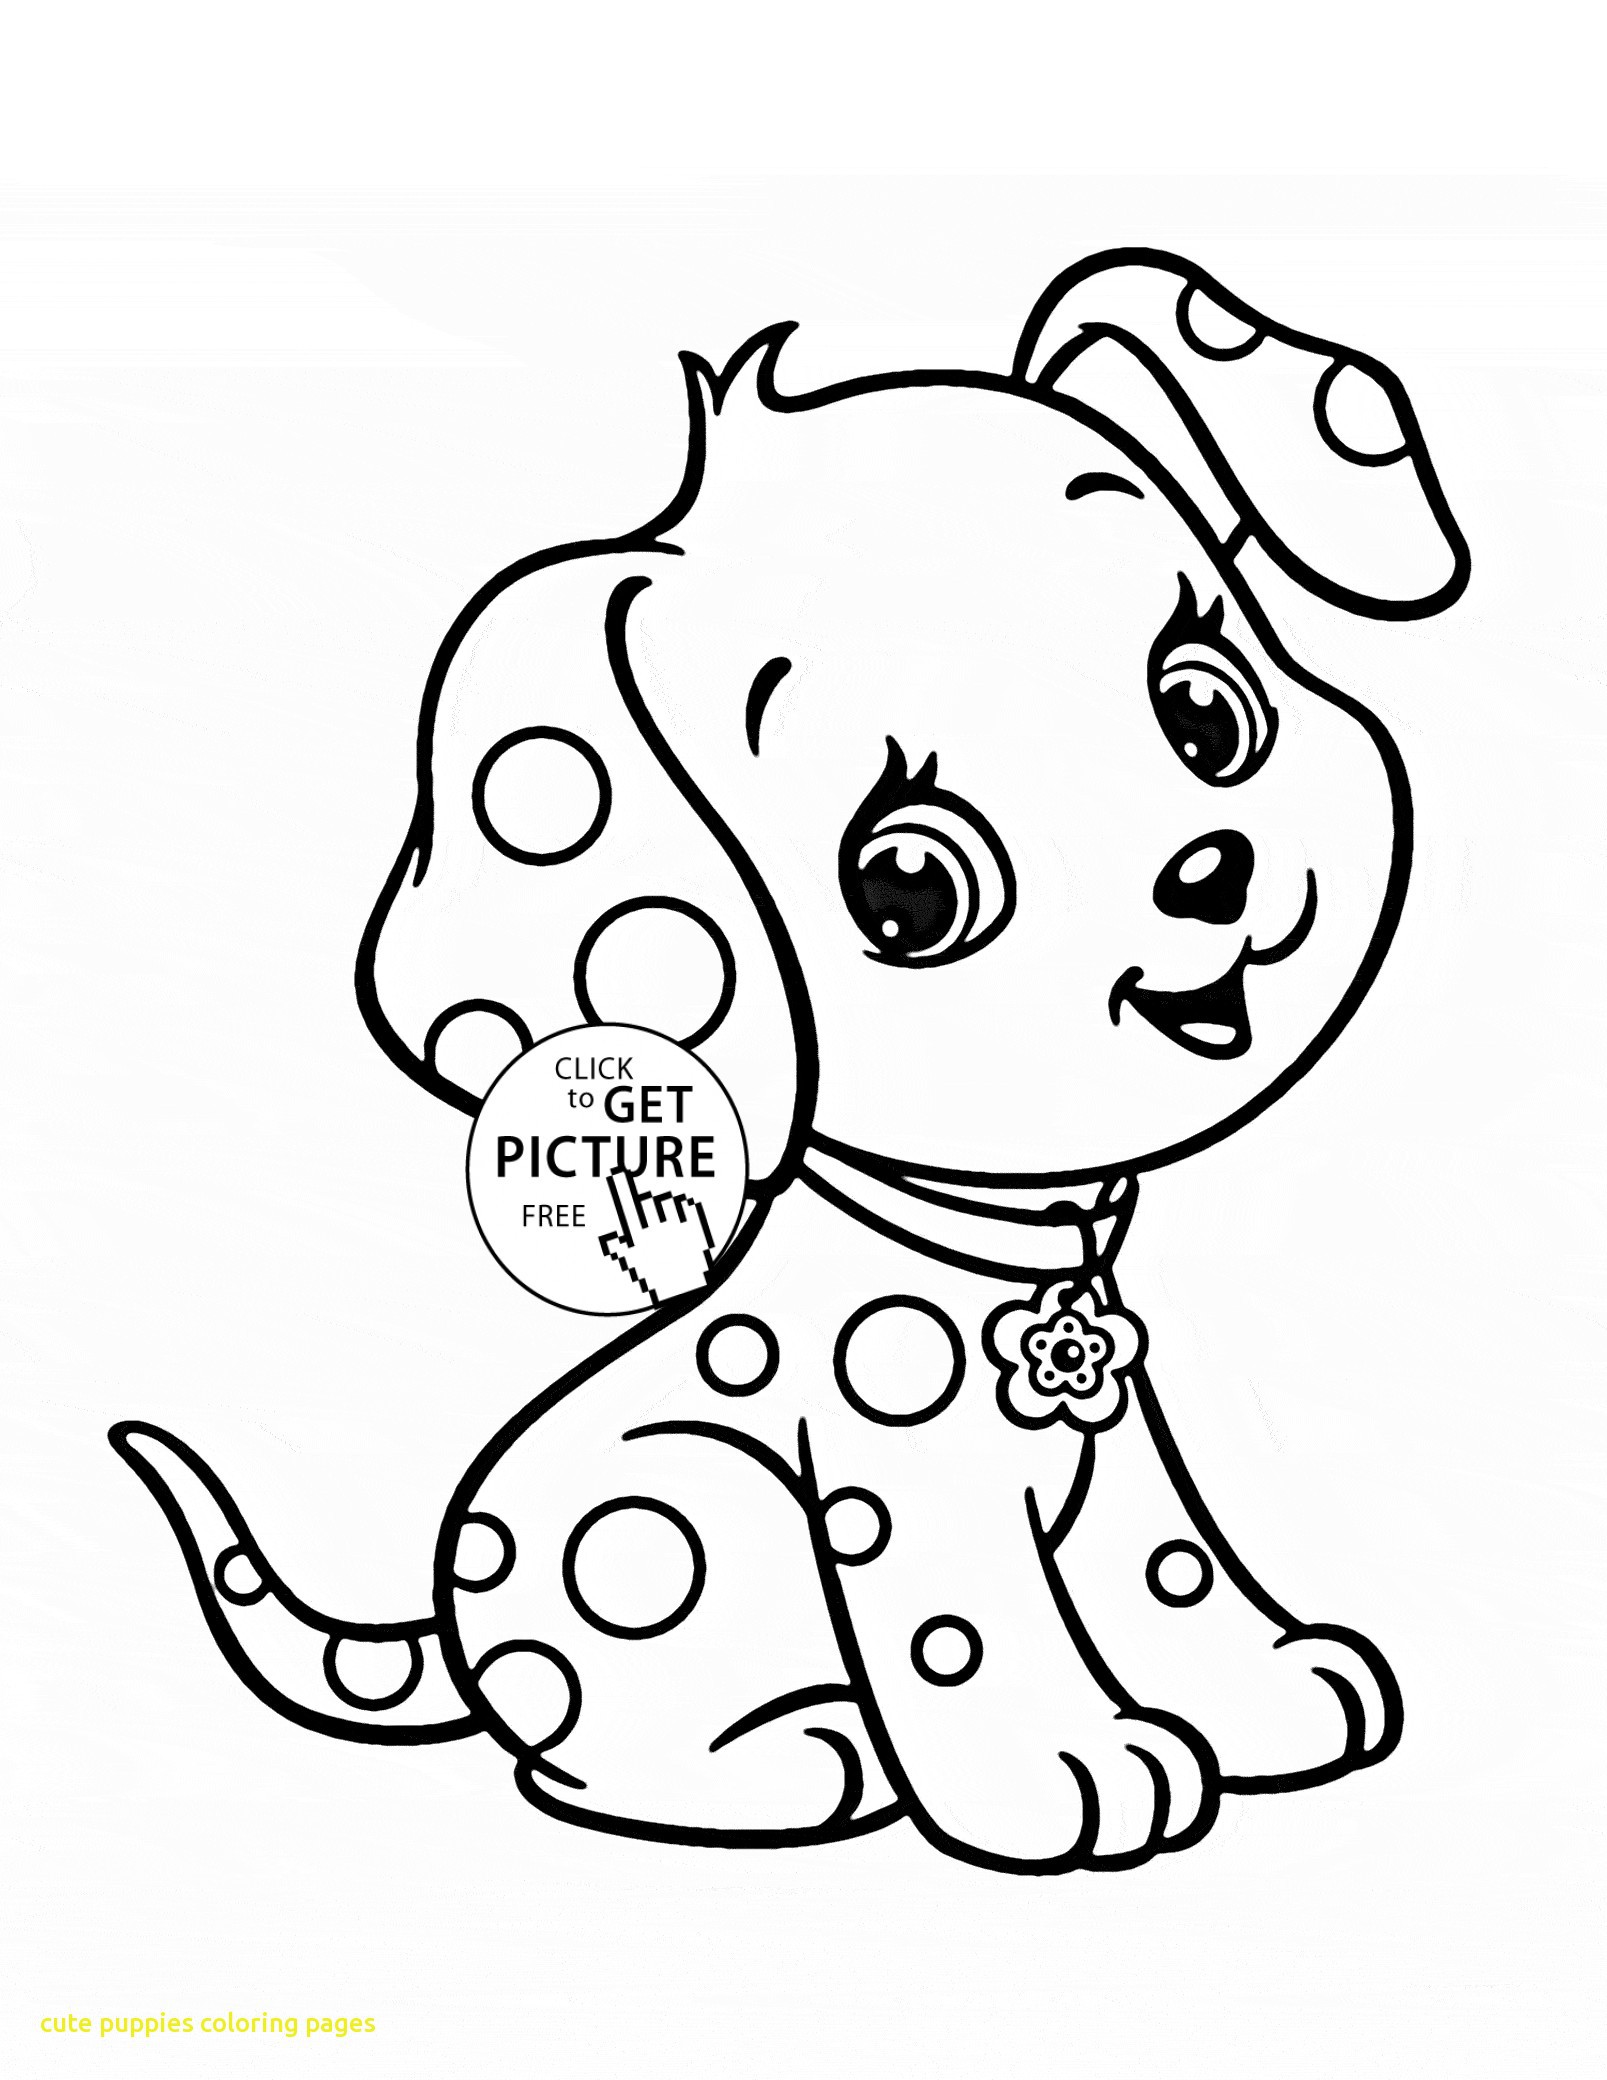 Adorable Puppy Coloring Pages Wallpaper